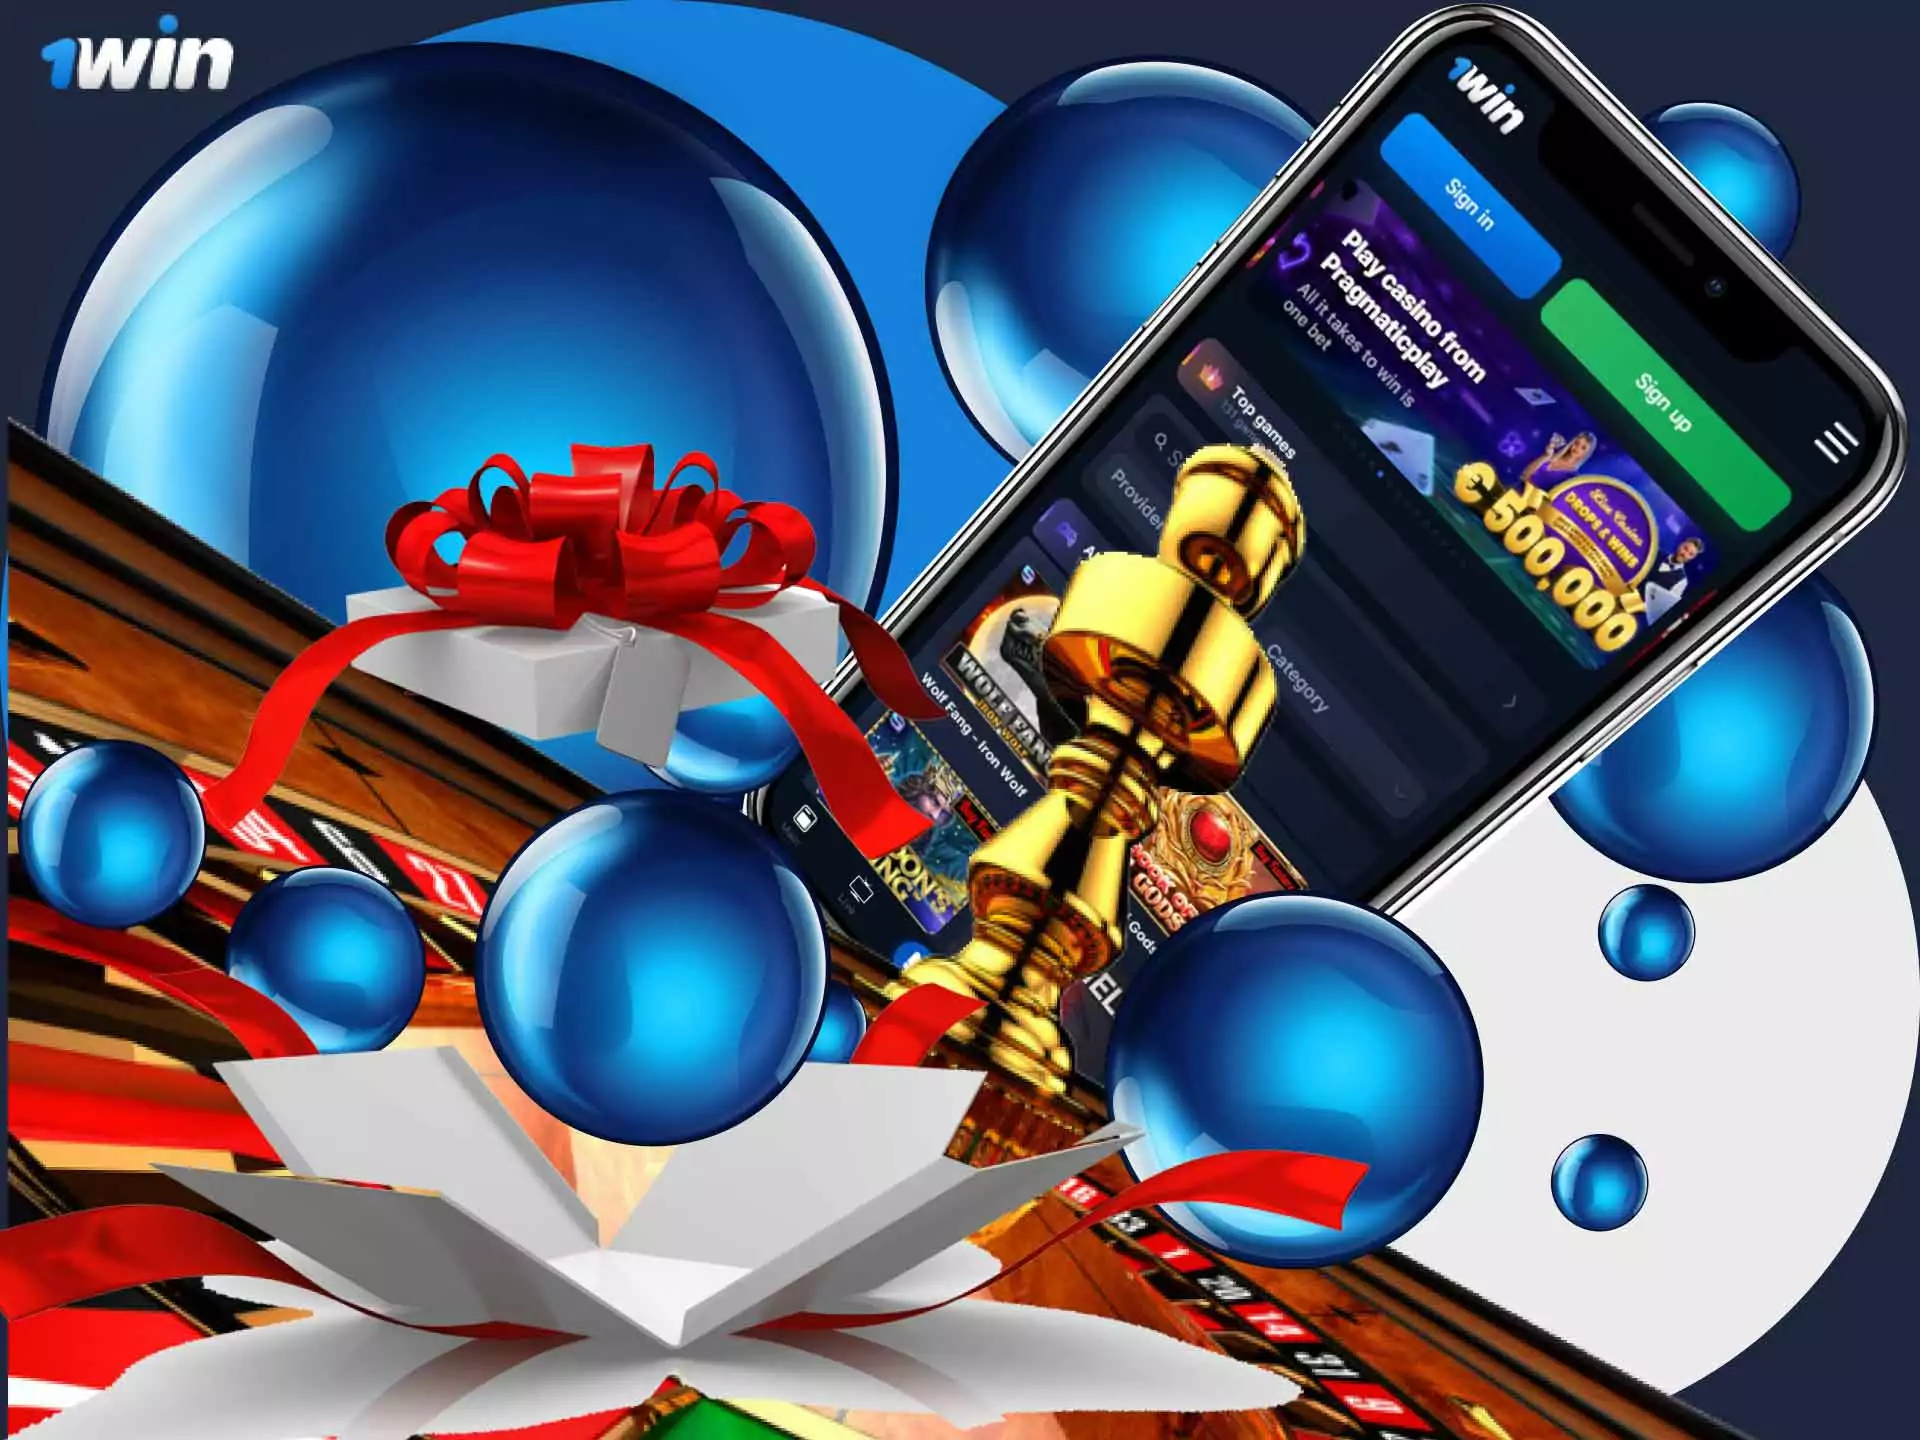 You can get up to 130,000 BDT as a welcome bonus for casino games in the 1win mobile app.